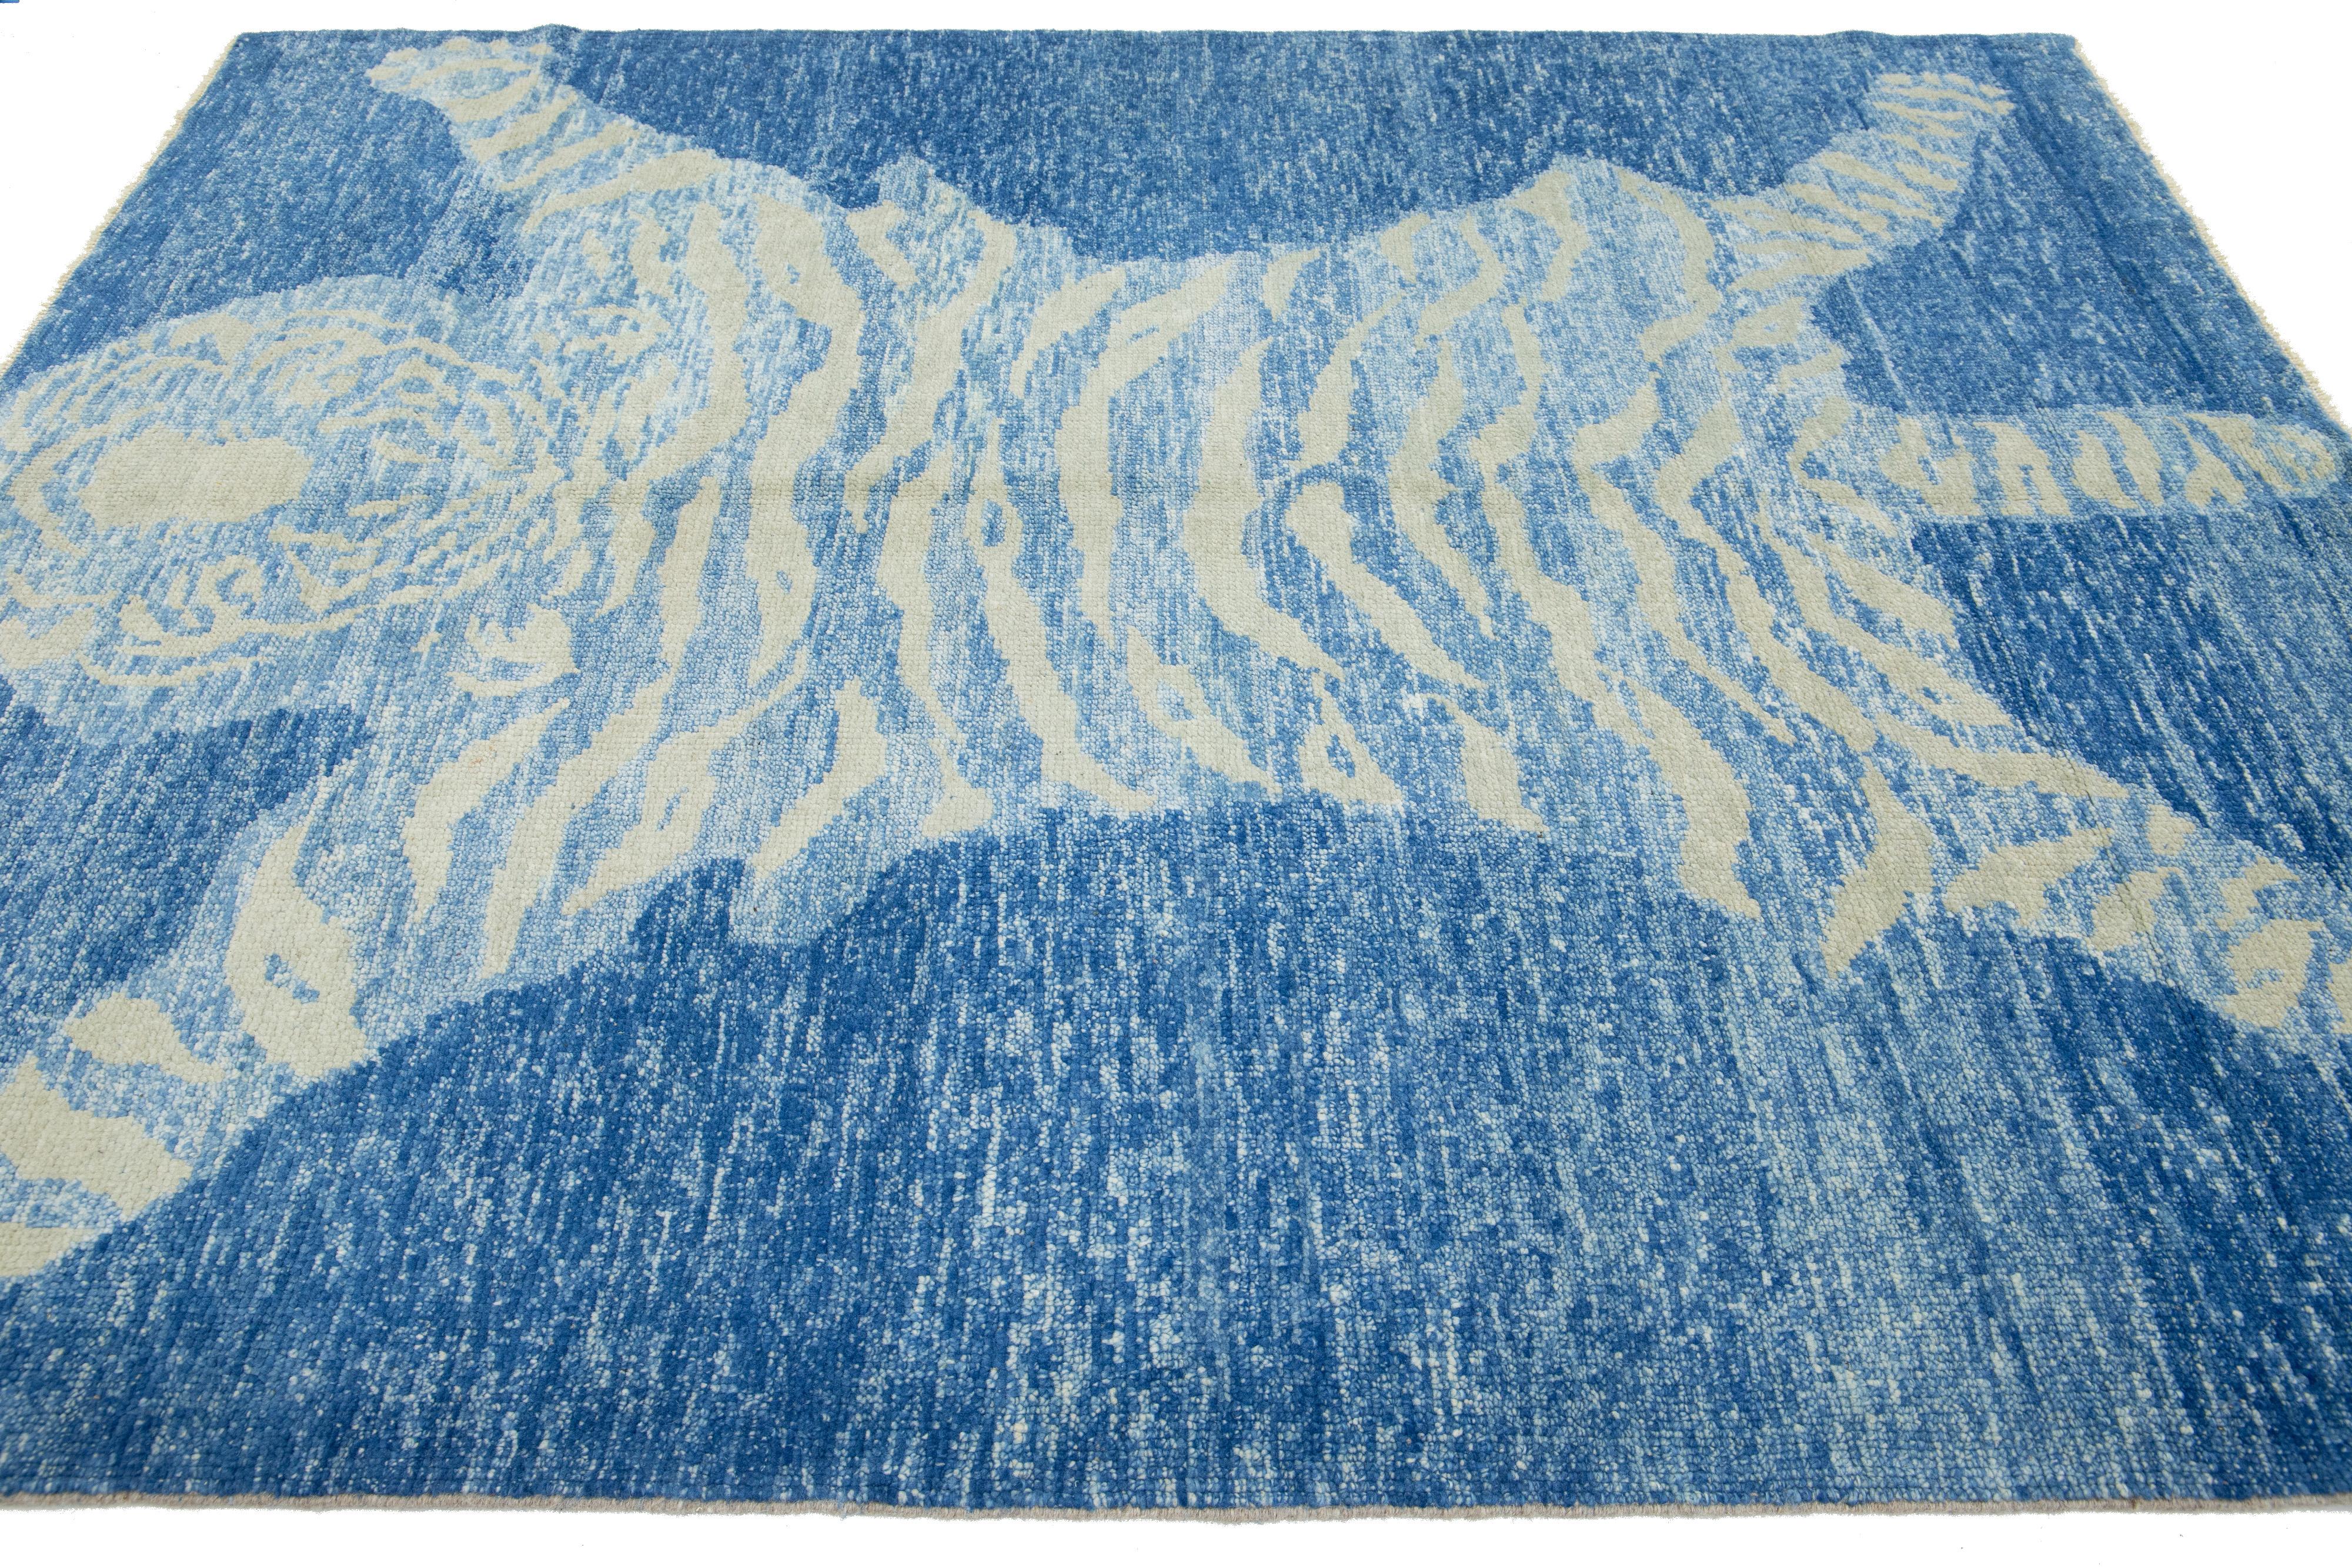 Handmade Contemporary Tiger Designed Wool Rug In Blue In New Condition For Sale In Norwalk, CT